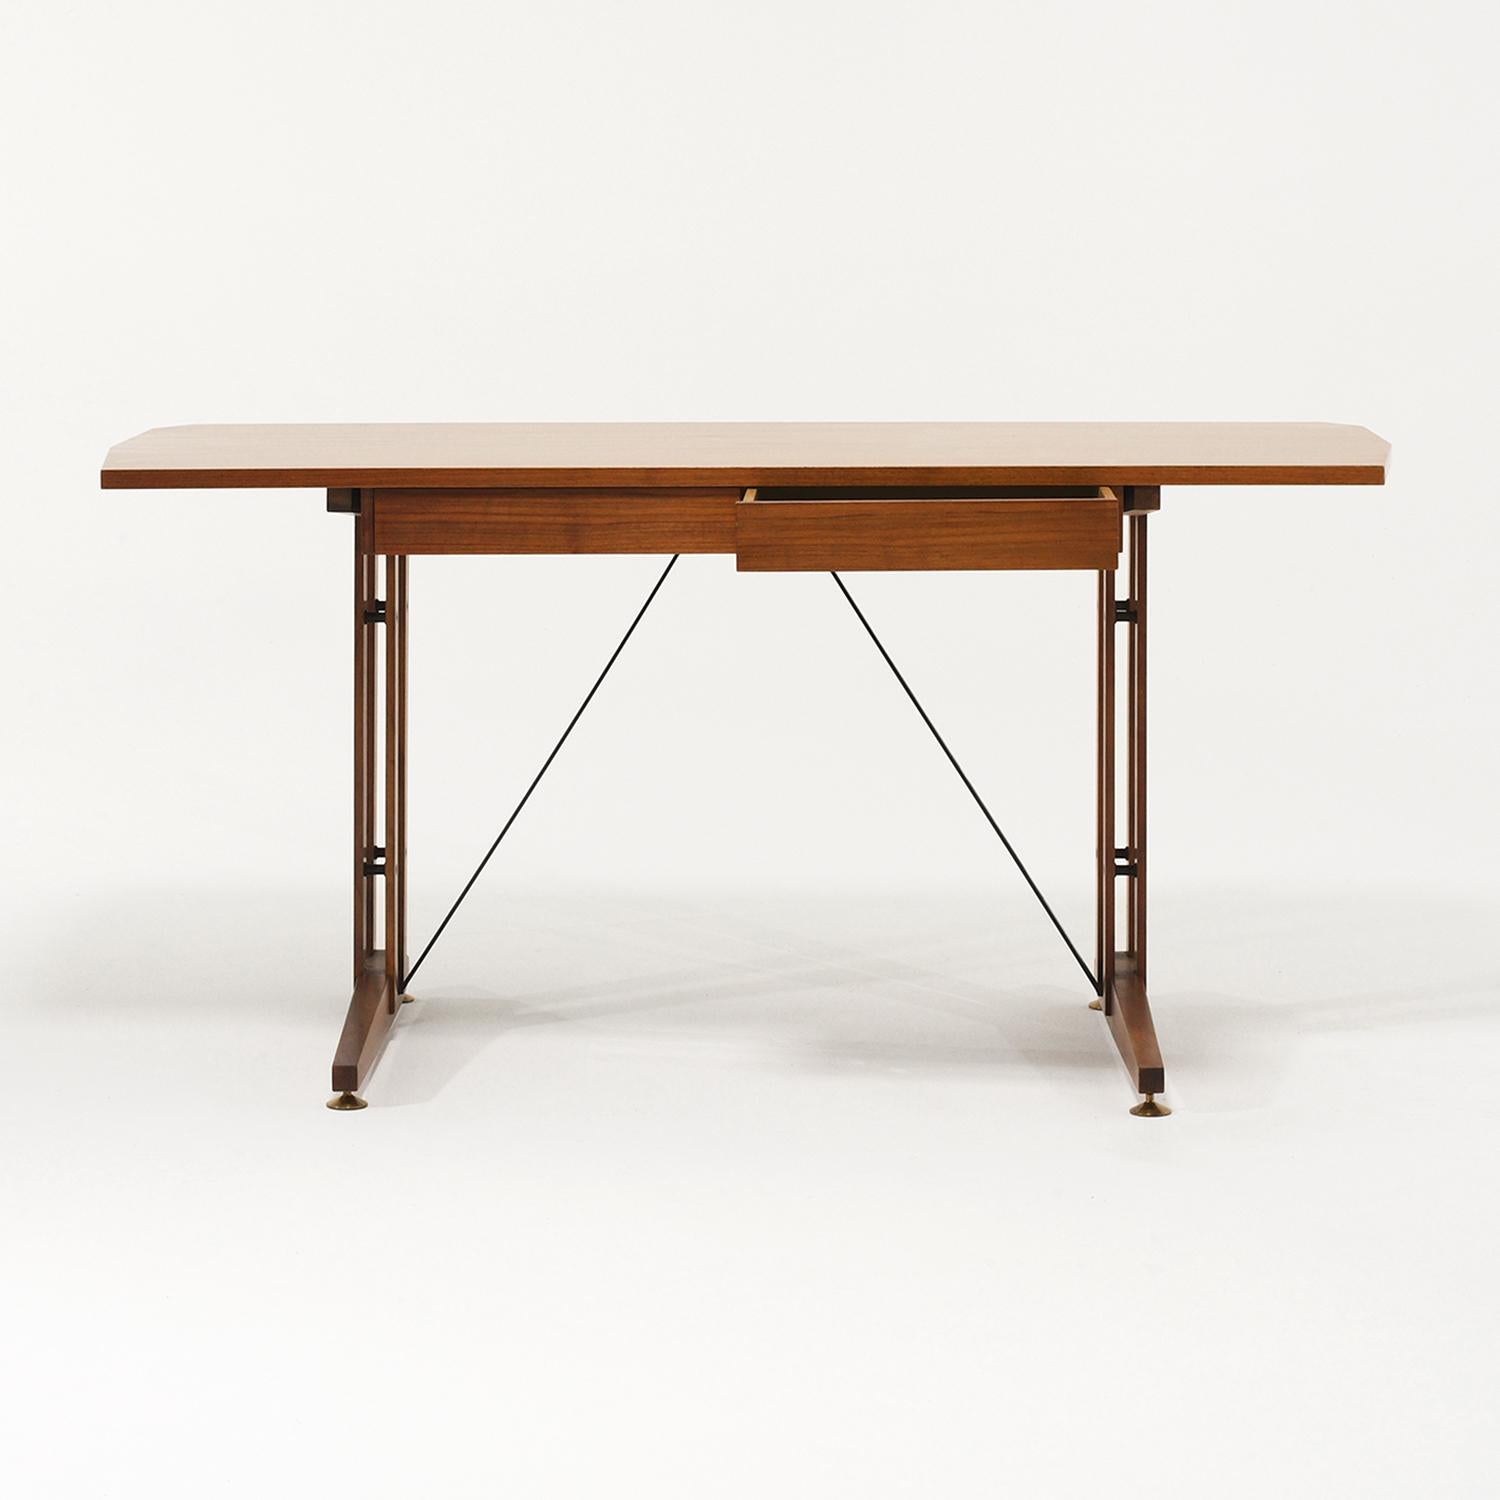 A rectangular, vintage Mid-Century Modern Italian writing table, desk made of hand crafted polished Walnut, composed with two drawers in the manner of Carlo Ratti, in good condition. The desk top is angular on the smaller sides and the legs stand on